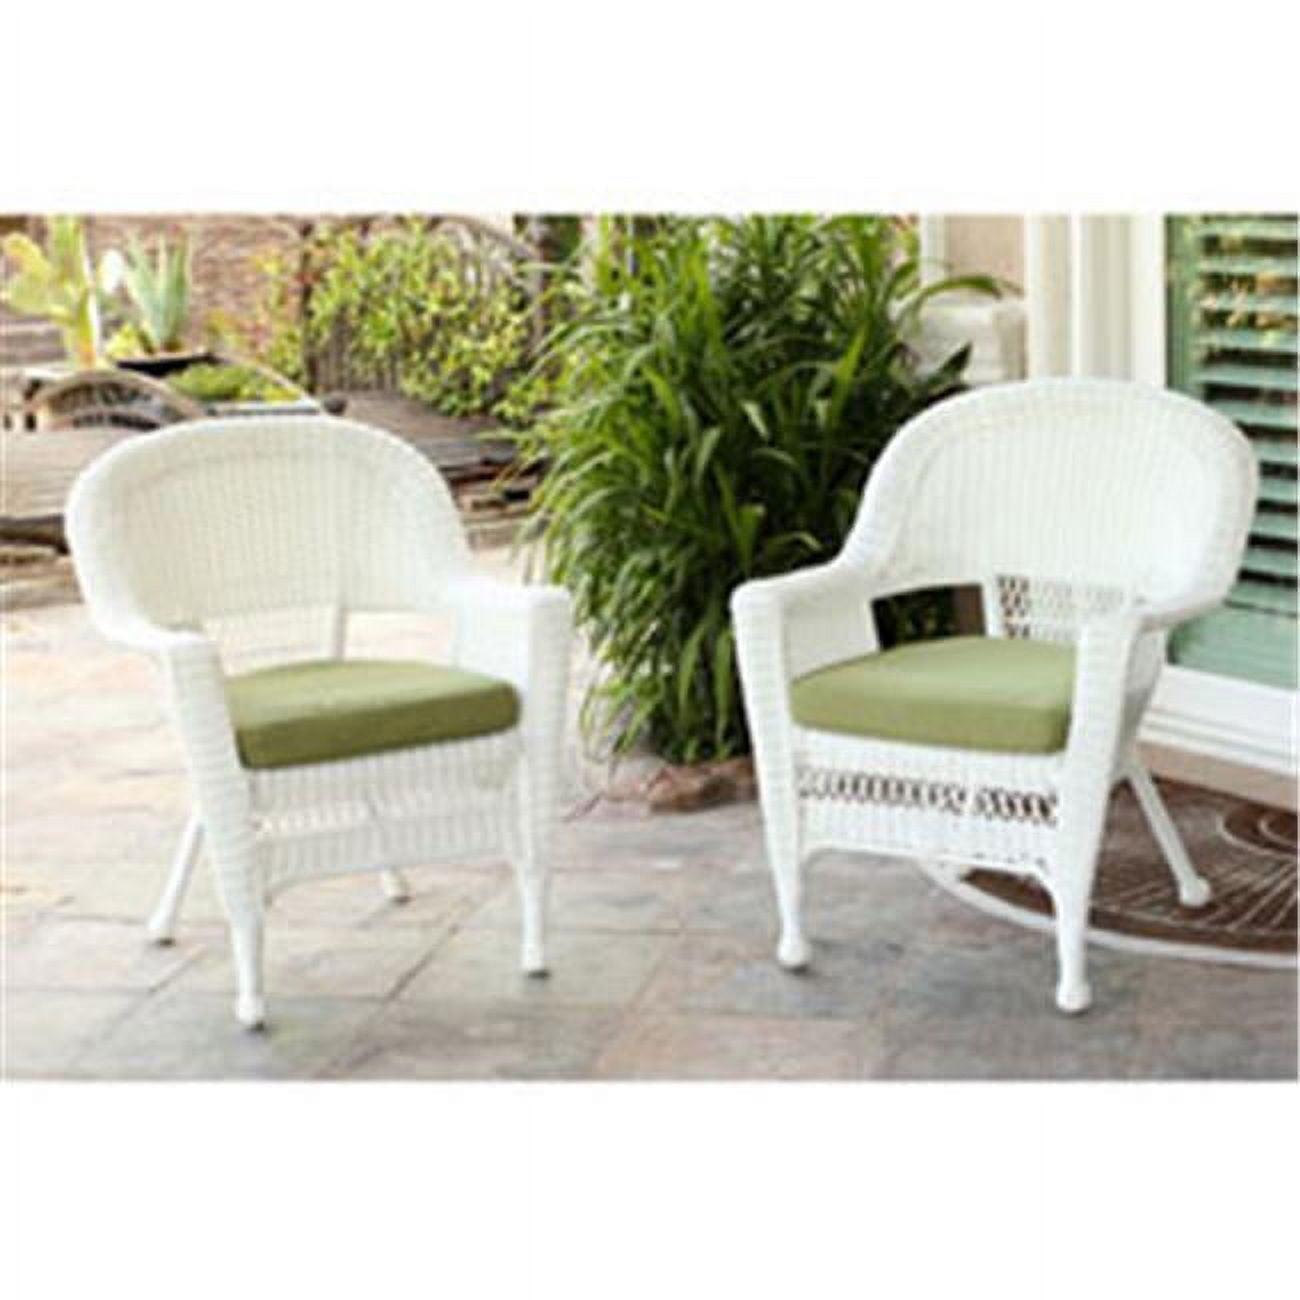 Charming White Resin Wicker Chair with Lush Green Cushion - Set of 4